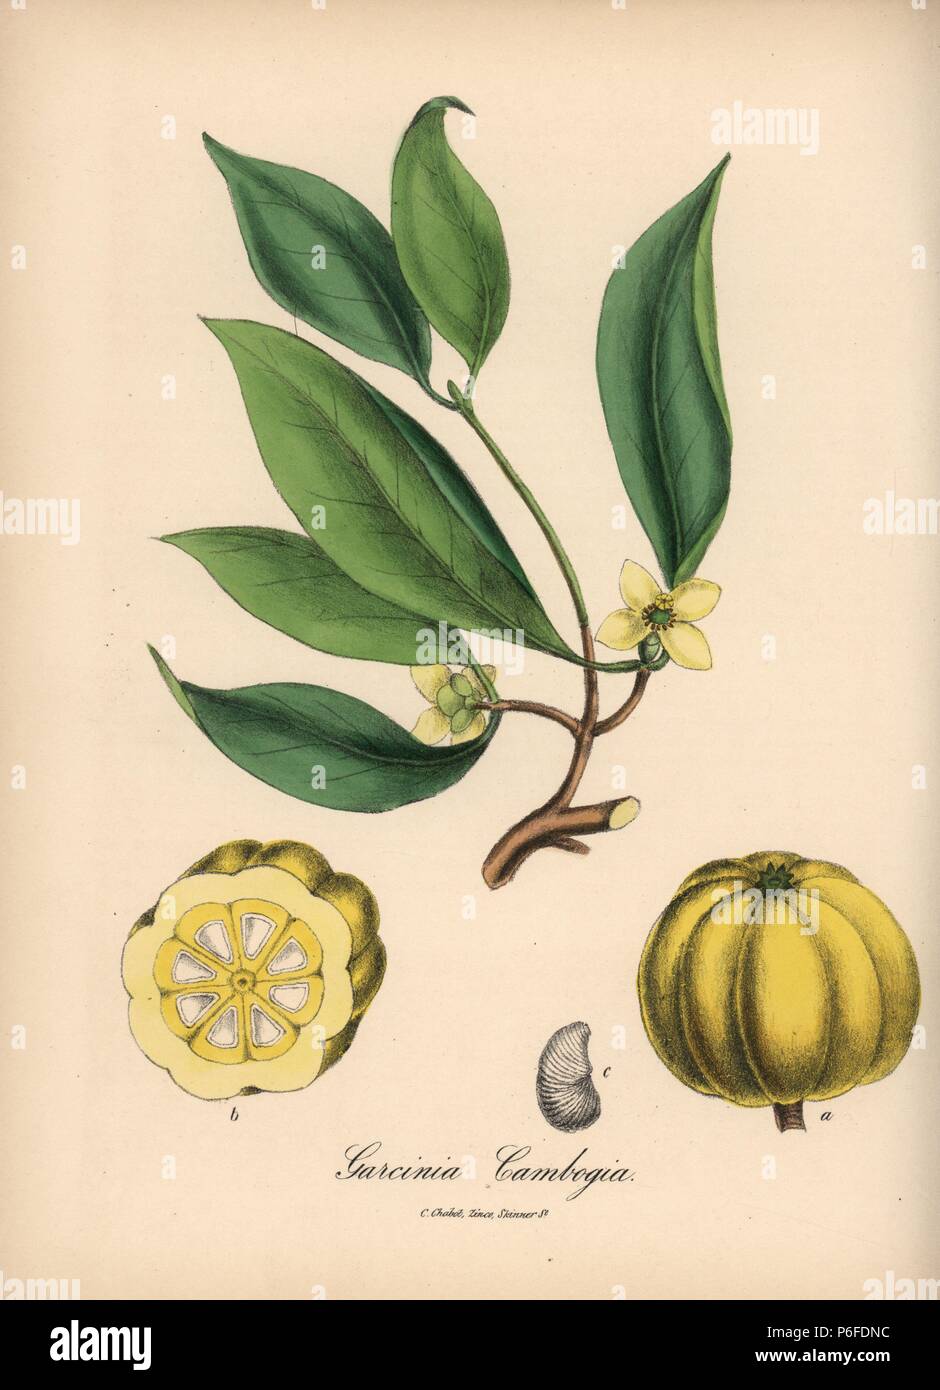 Brindleberry, Garcinia gummi-gutta, with flower, leaf, fruit and section. Handcoloured zincograph by C. Chabot drawn by Miss M. A. Burnett from her 'Plantae Utiliores: or Illustrations of Useful Plants,' Whittaker, London, 1842. Miss Burnett drew the botanical illustrations, but the text was chiefly by her late brother, British botanist Gilbert Thomas Burnett (1800-1835). Stock Photo